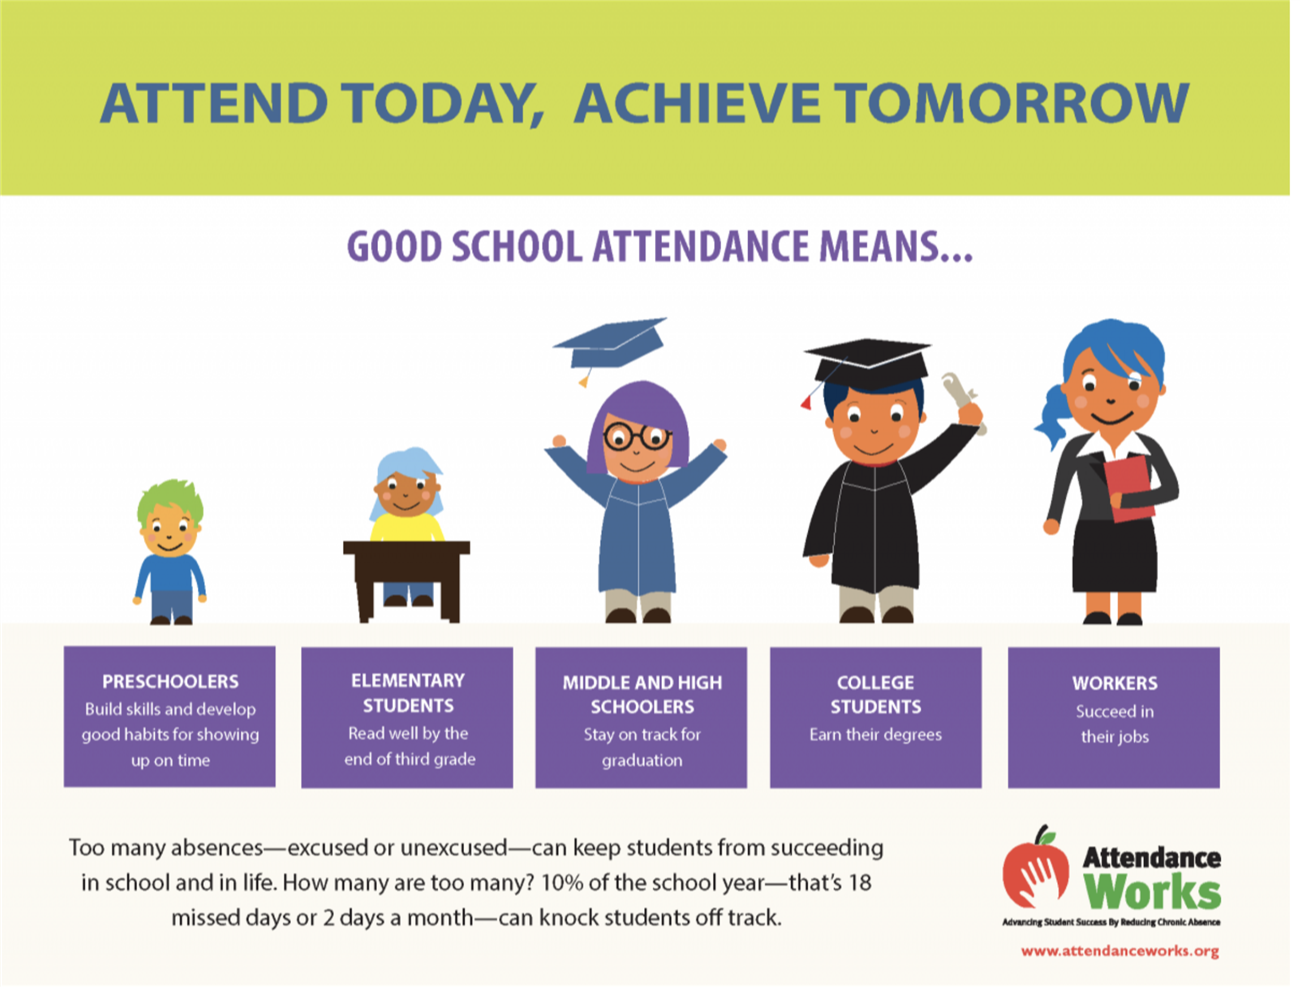 A poster with 5 people of varying ages with corresponding attendance benefits reading: Attend today, Achieve Tomorrow, good school attendance means... preschoolers, build skills and develop good habits for showing up on time. Elementary Students - Read well by the end of the third grade. Middle and High Schoolers, Stay on track for graduation. College students - Earn their degrees. Workers, Succeed in their jobs. Too many absences , excused or unexcused can keep students from succeeding in school and in life. How many are too Many? 10% of the school year- that is 18 days or 2 days a month can knock students off track.